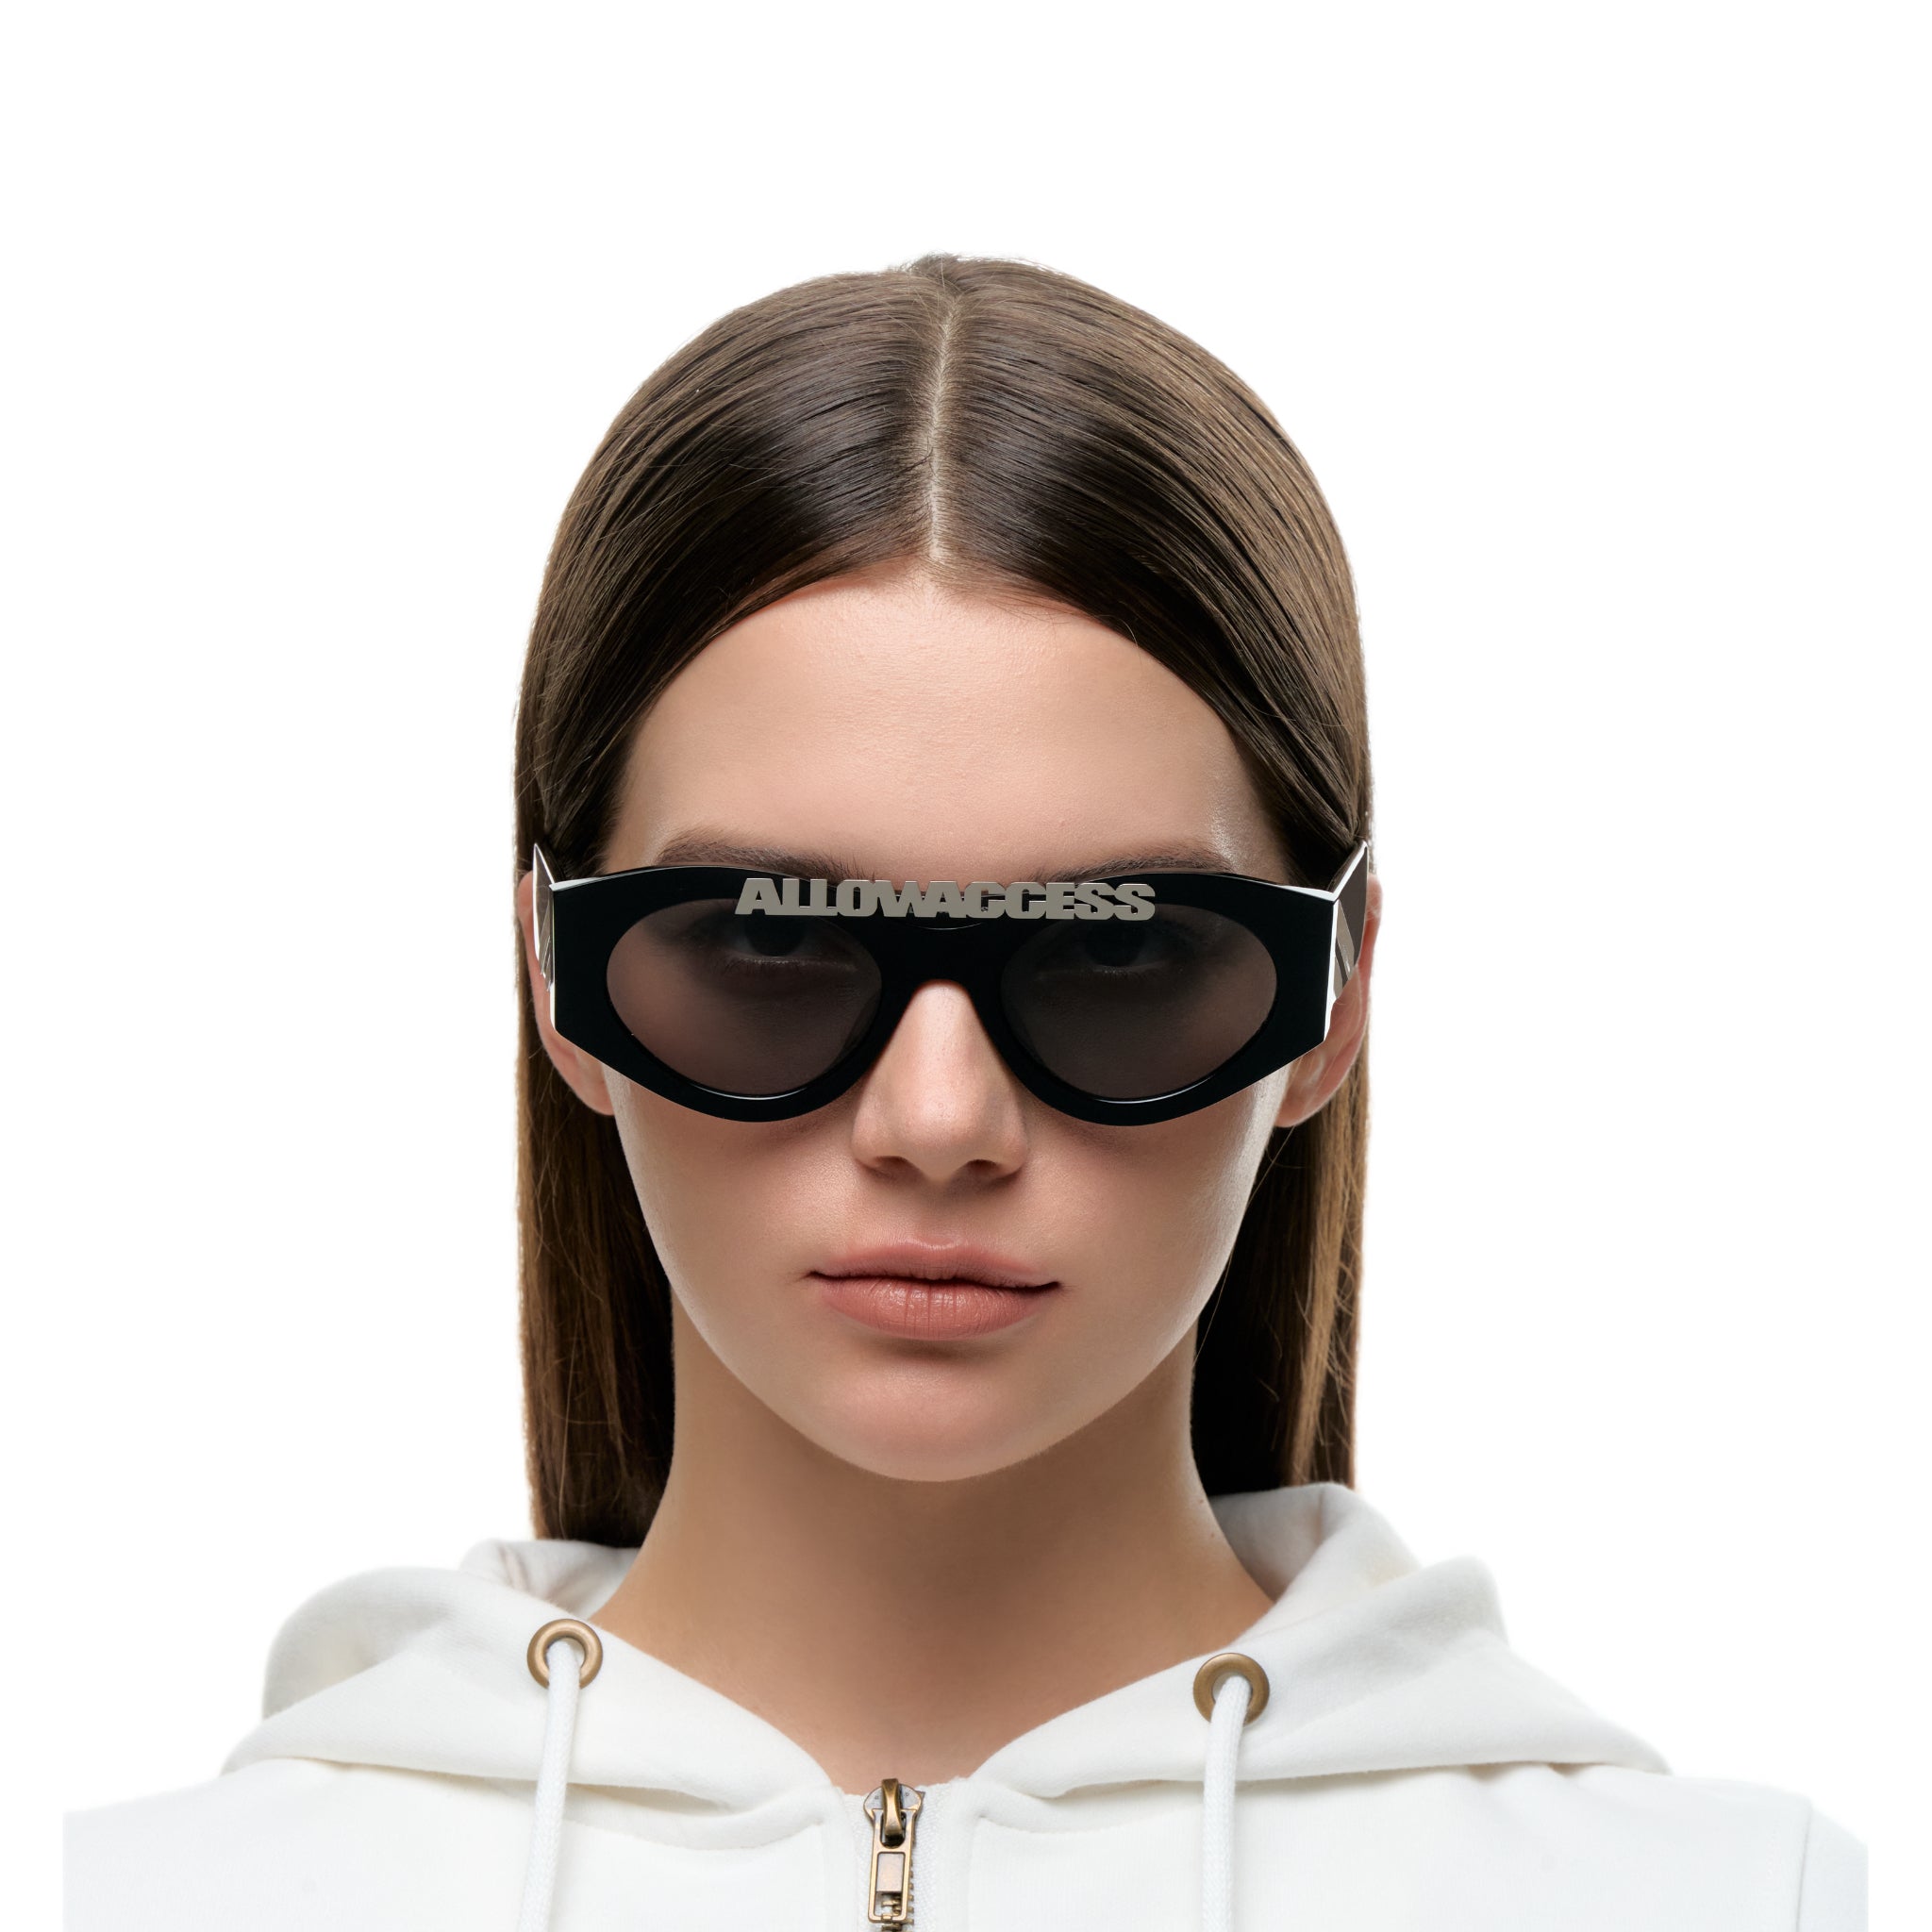 Allow Access Attraction Series Momo Sunglass In Black | MADA IN CHINA